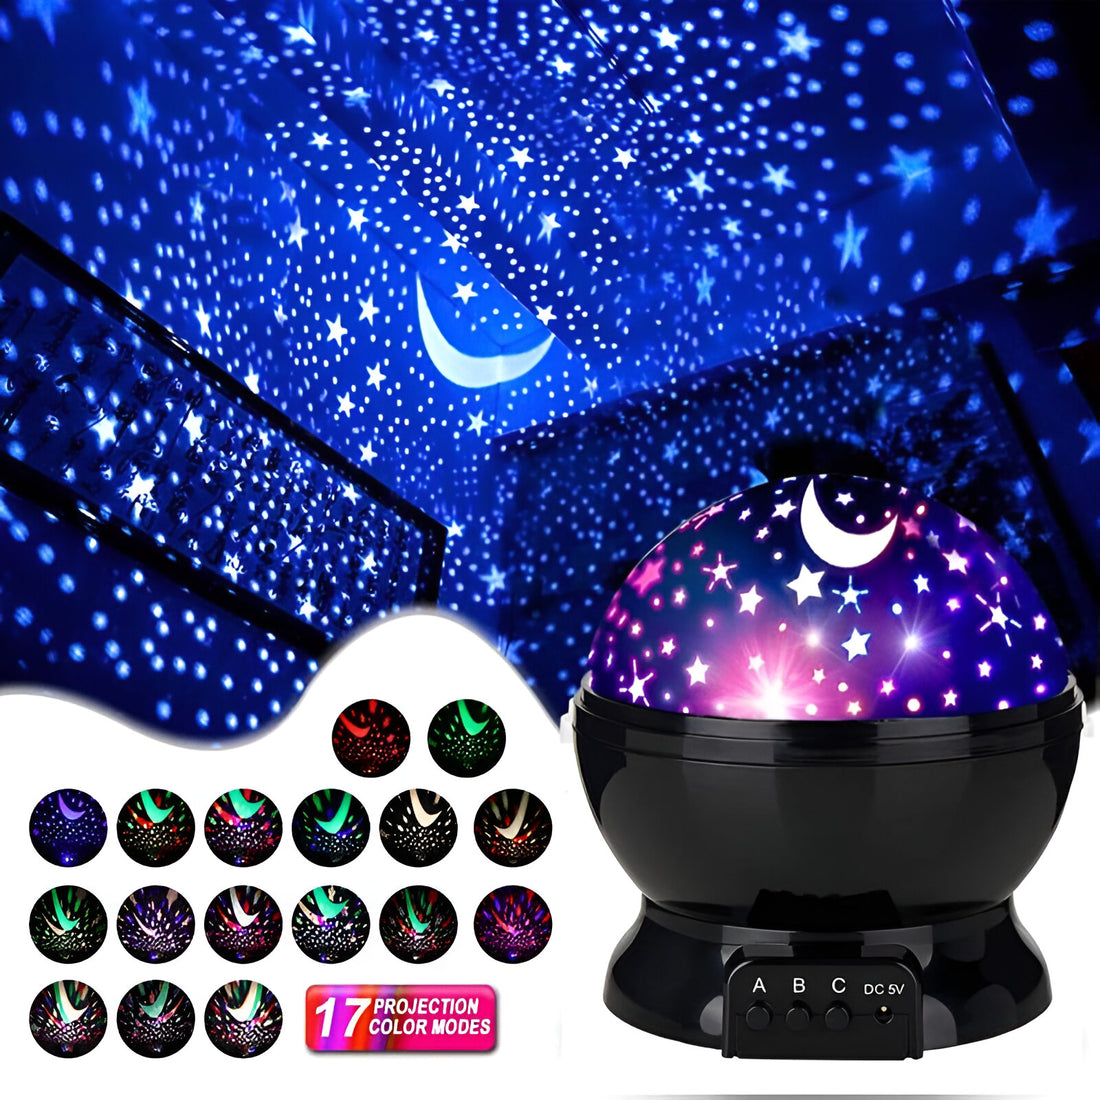 Rotating Projector Night Light - Sky Moon Galaxy Lamp for Home Bedroom